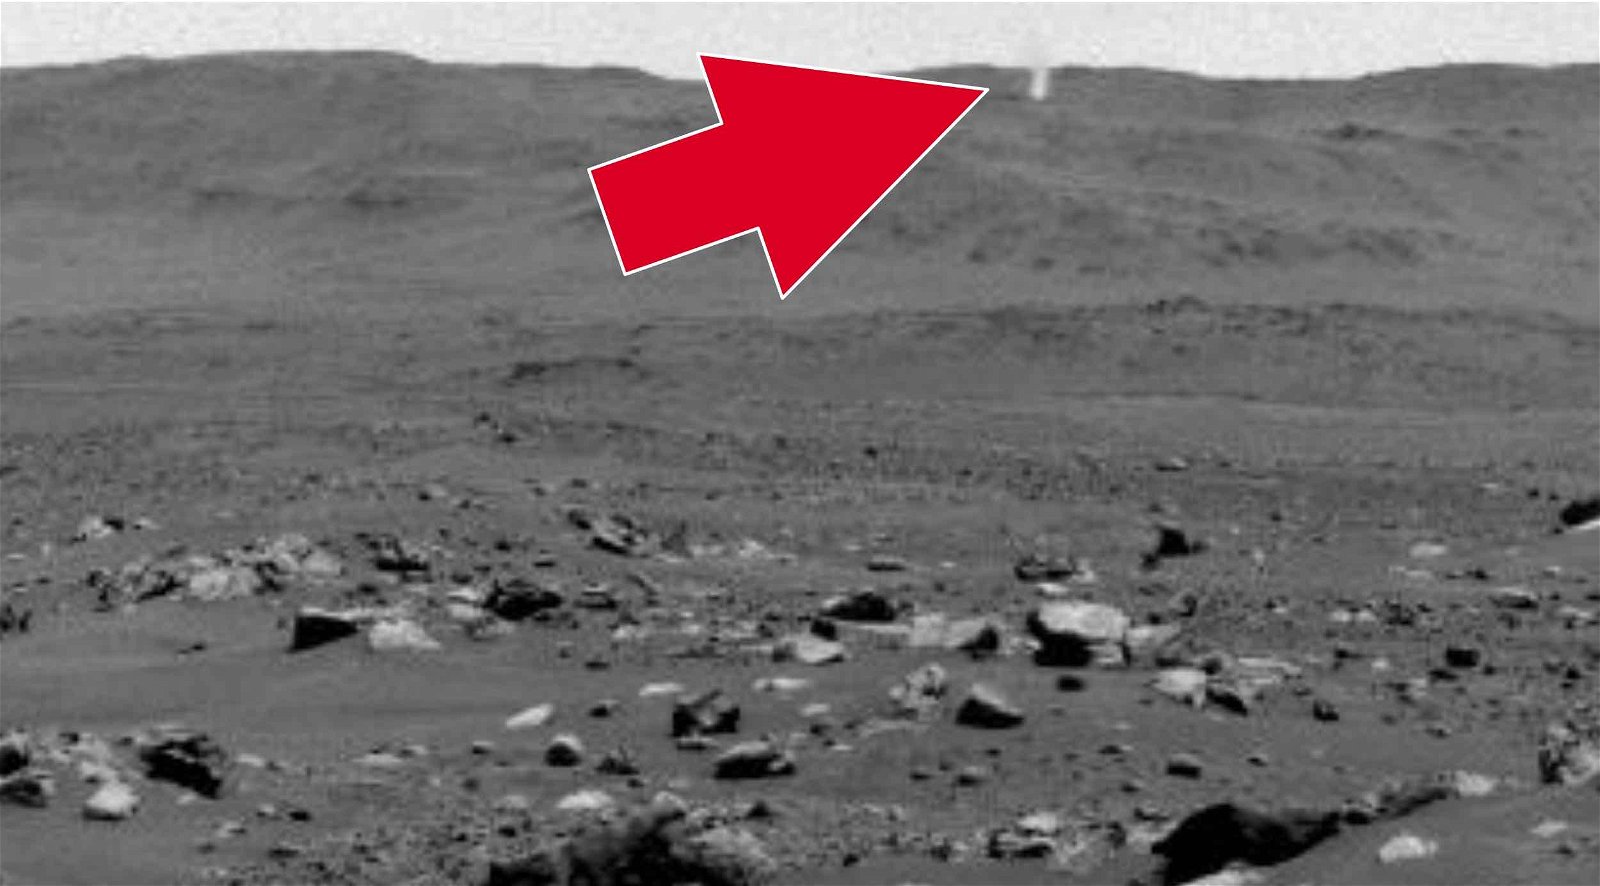 Something Odd Was Just Seen Crossing the Martian Landscape, and NASA’s Perseverance Rover Caught It All on Film